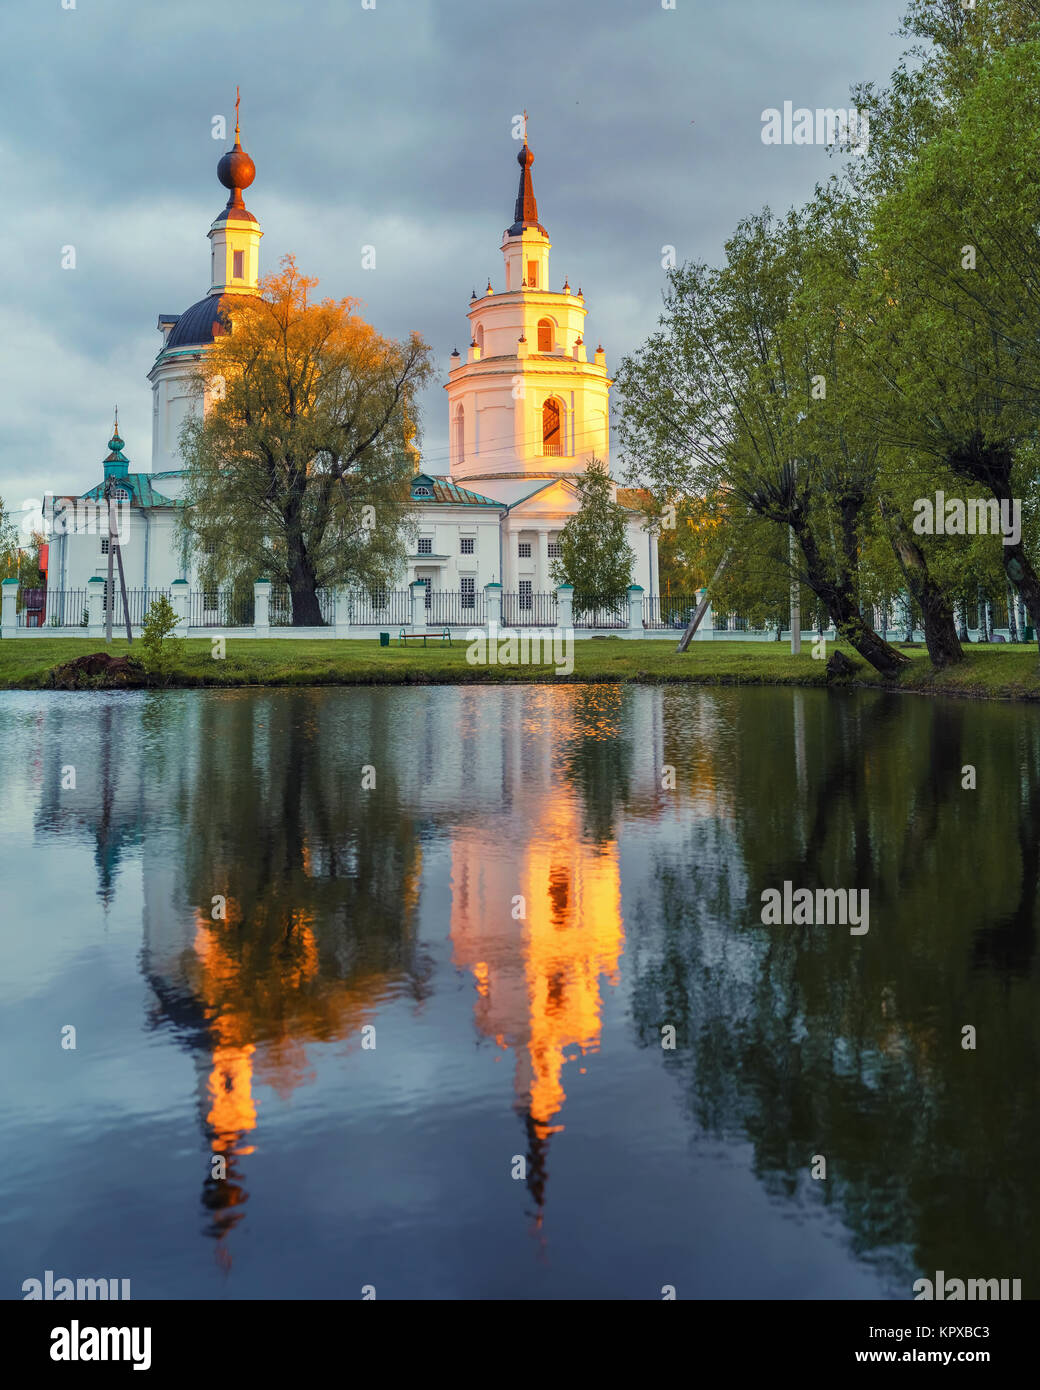 Ortodox church and its reflection in a pond. Stock Photo